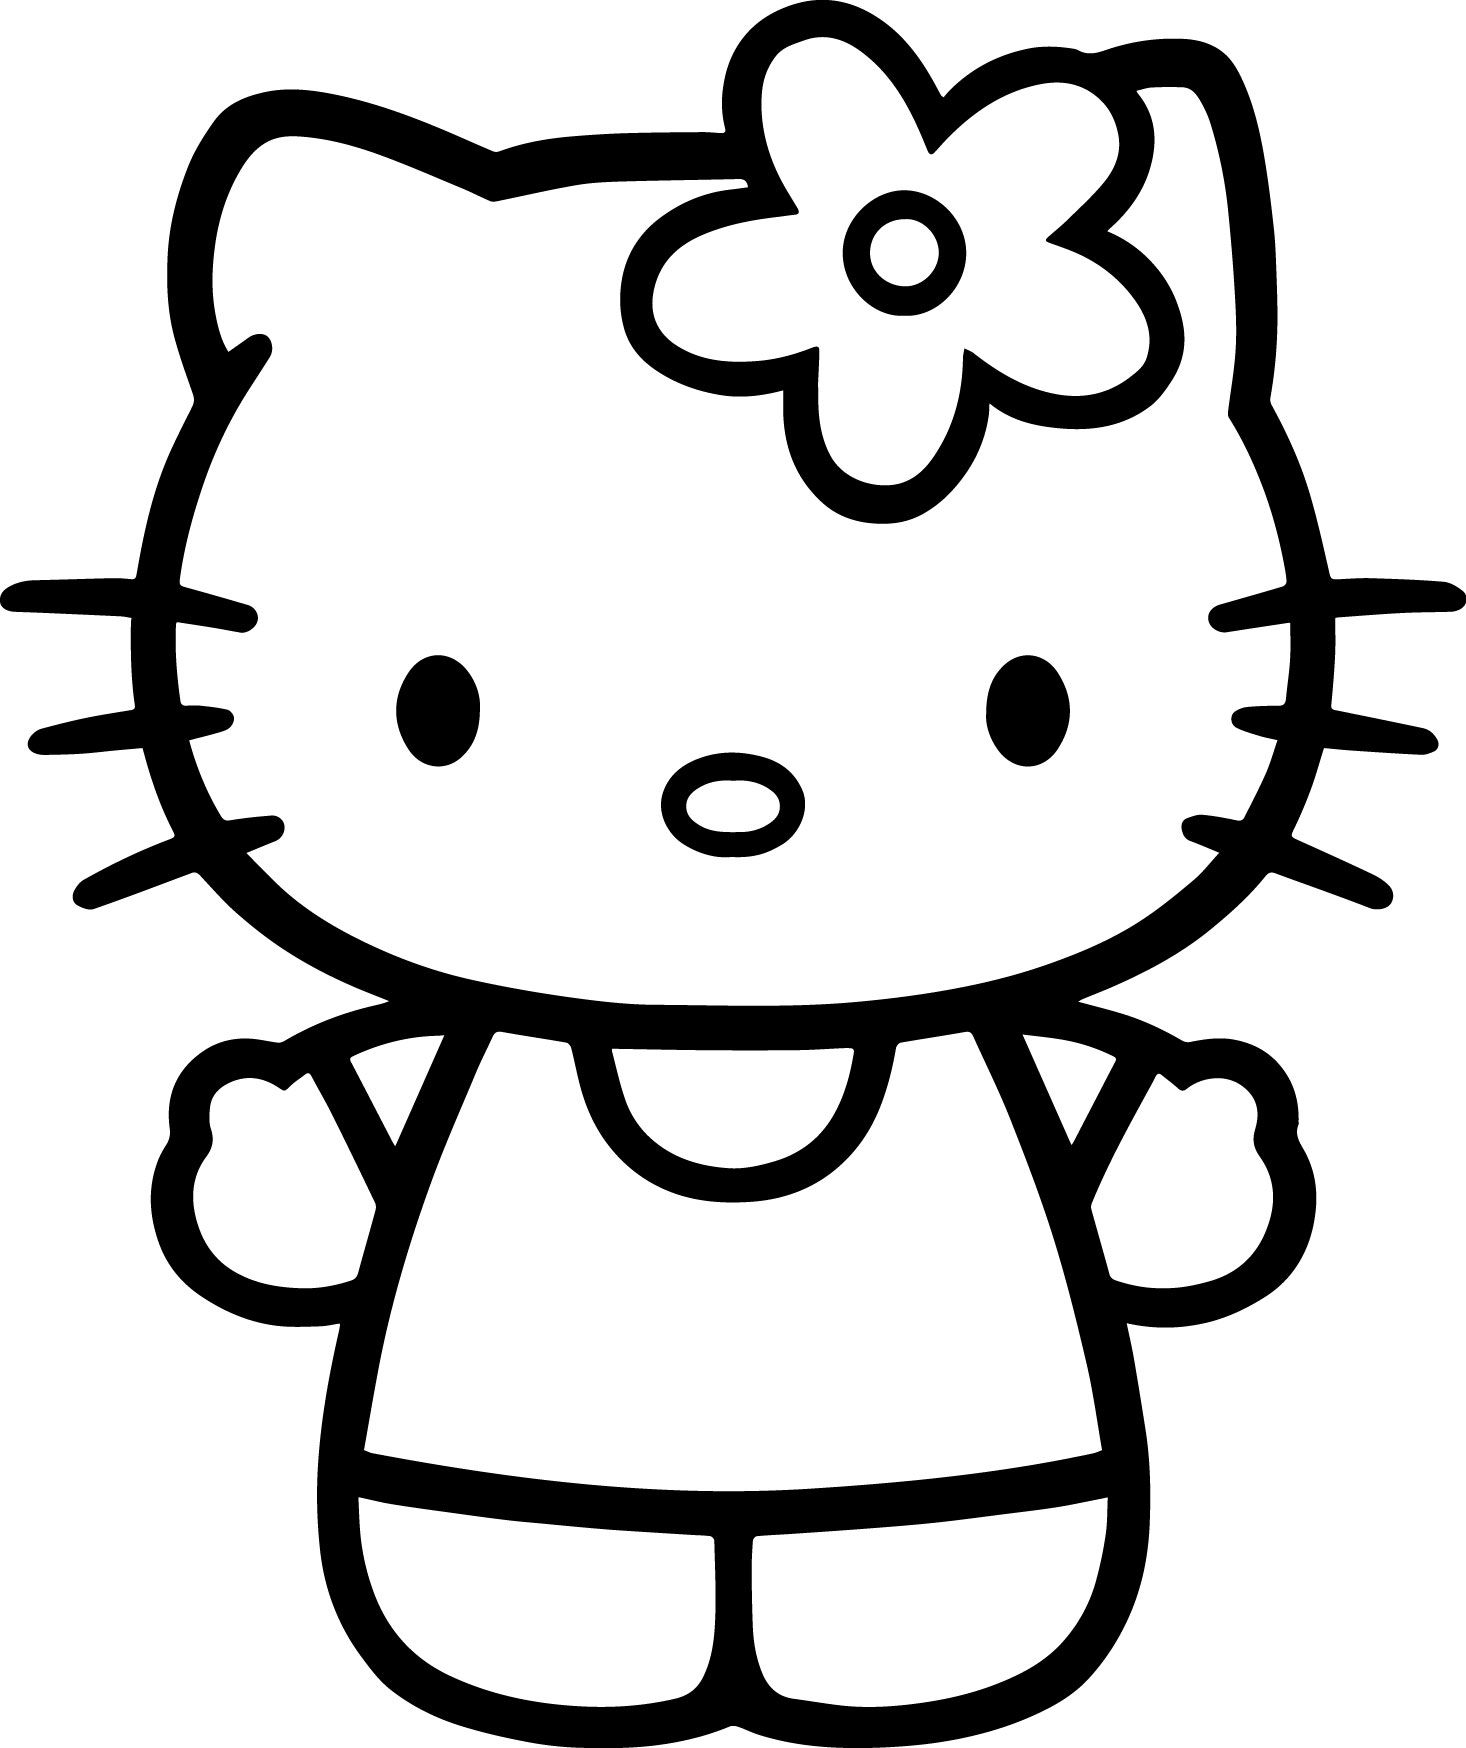 hello kitty printable coloring pages